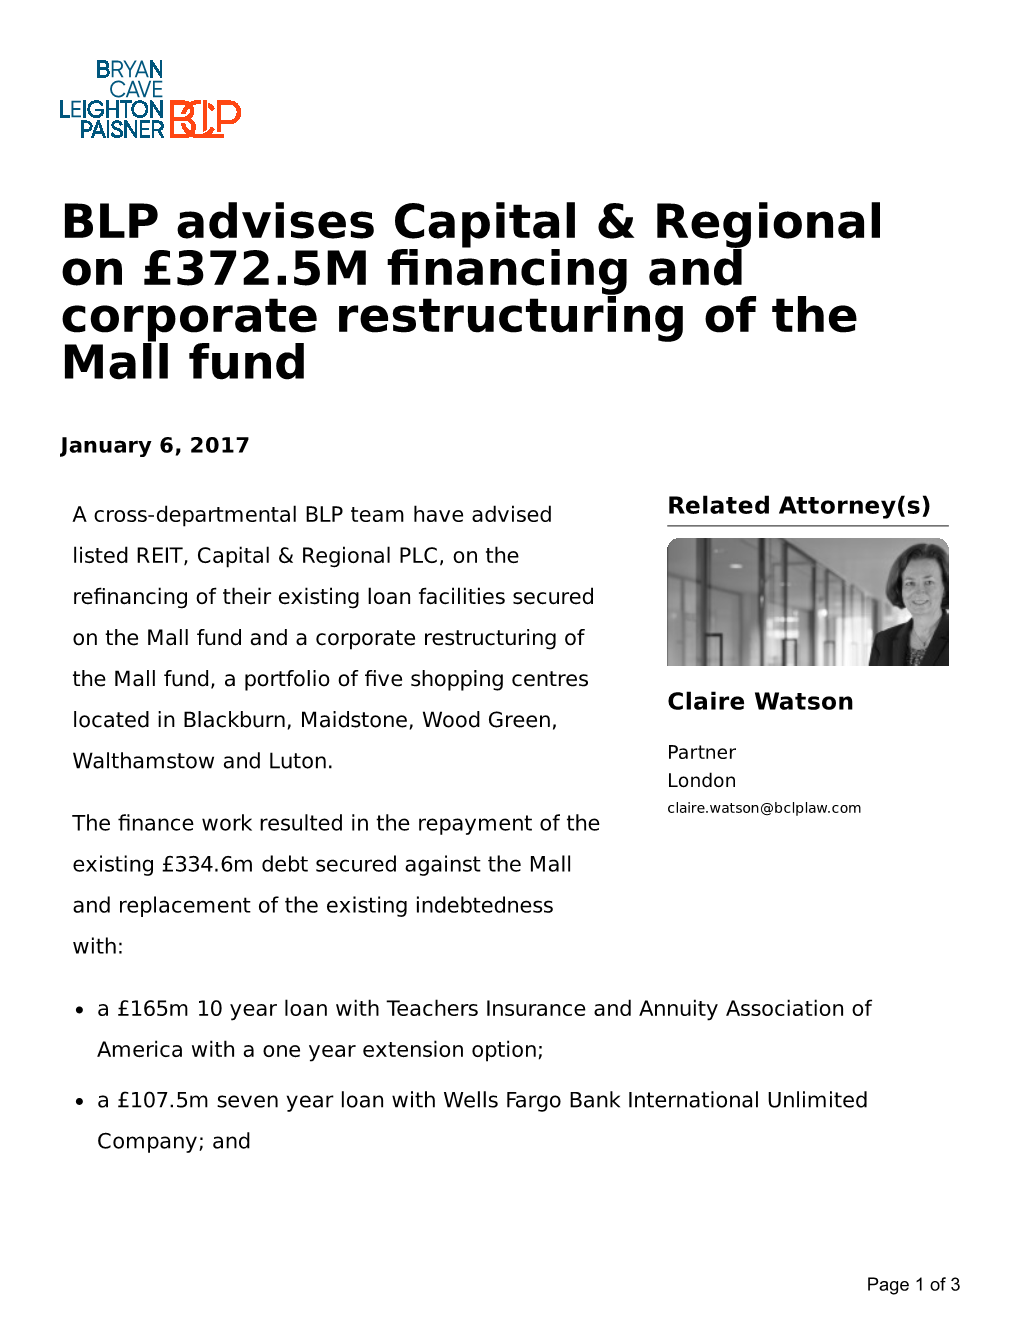 BLP Advises Capital & Regional on £372.5M Financing and Corporate